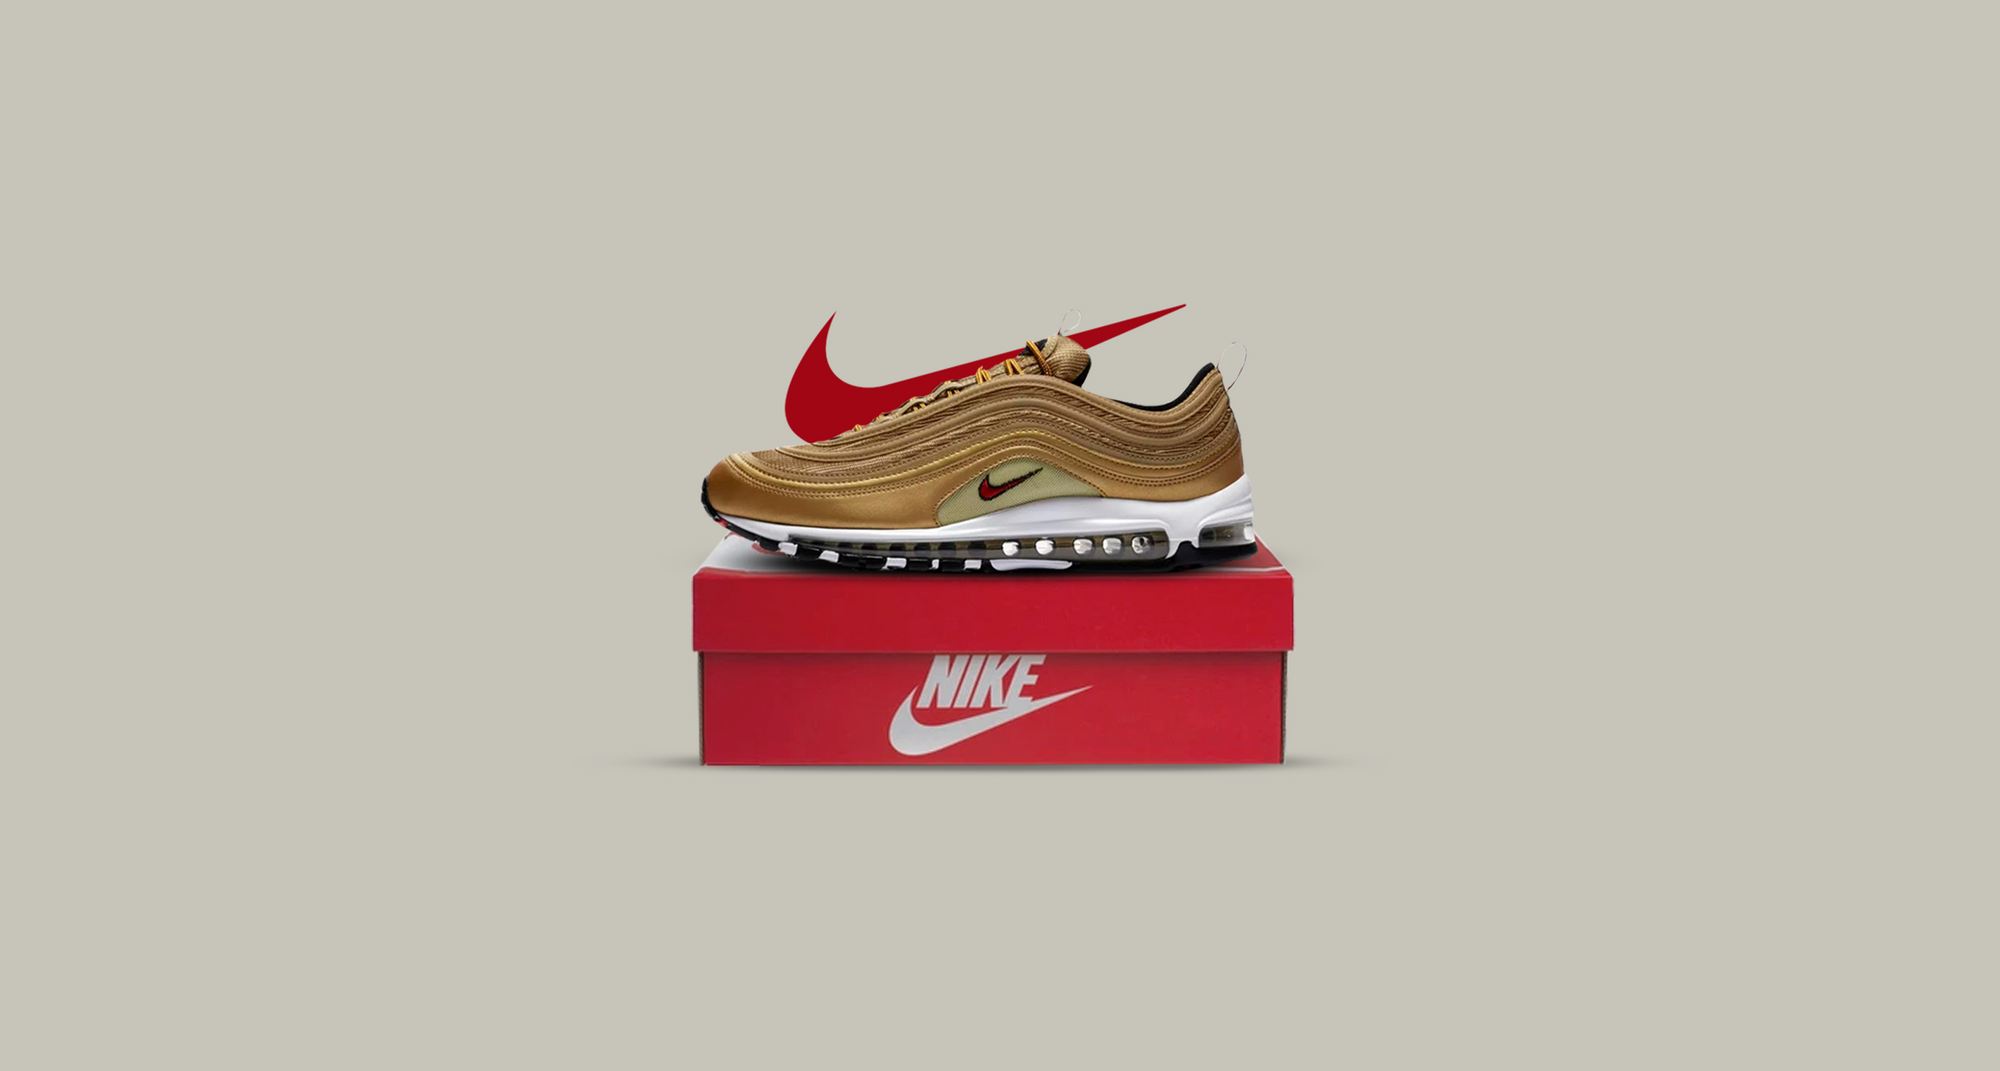 Is Nike Re-Releasing The Gold Air Max 97?